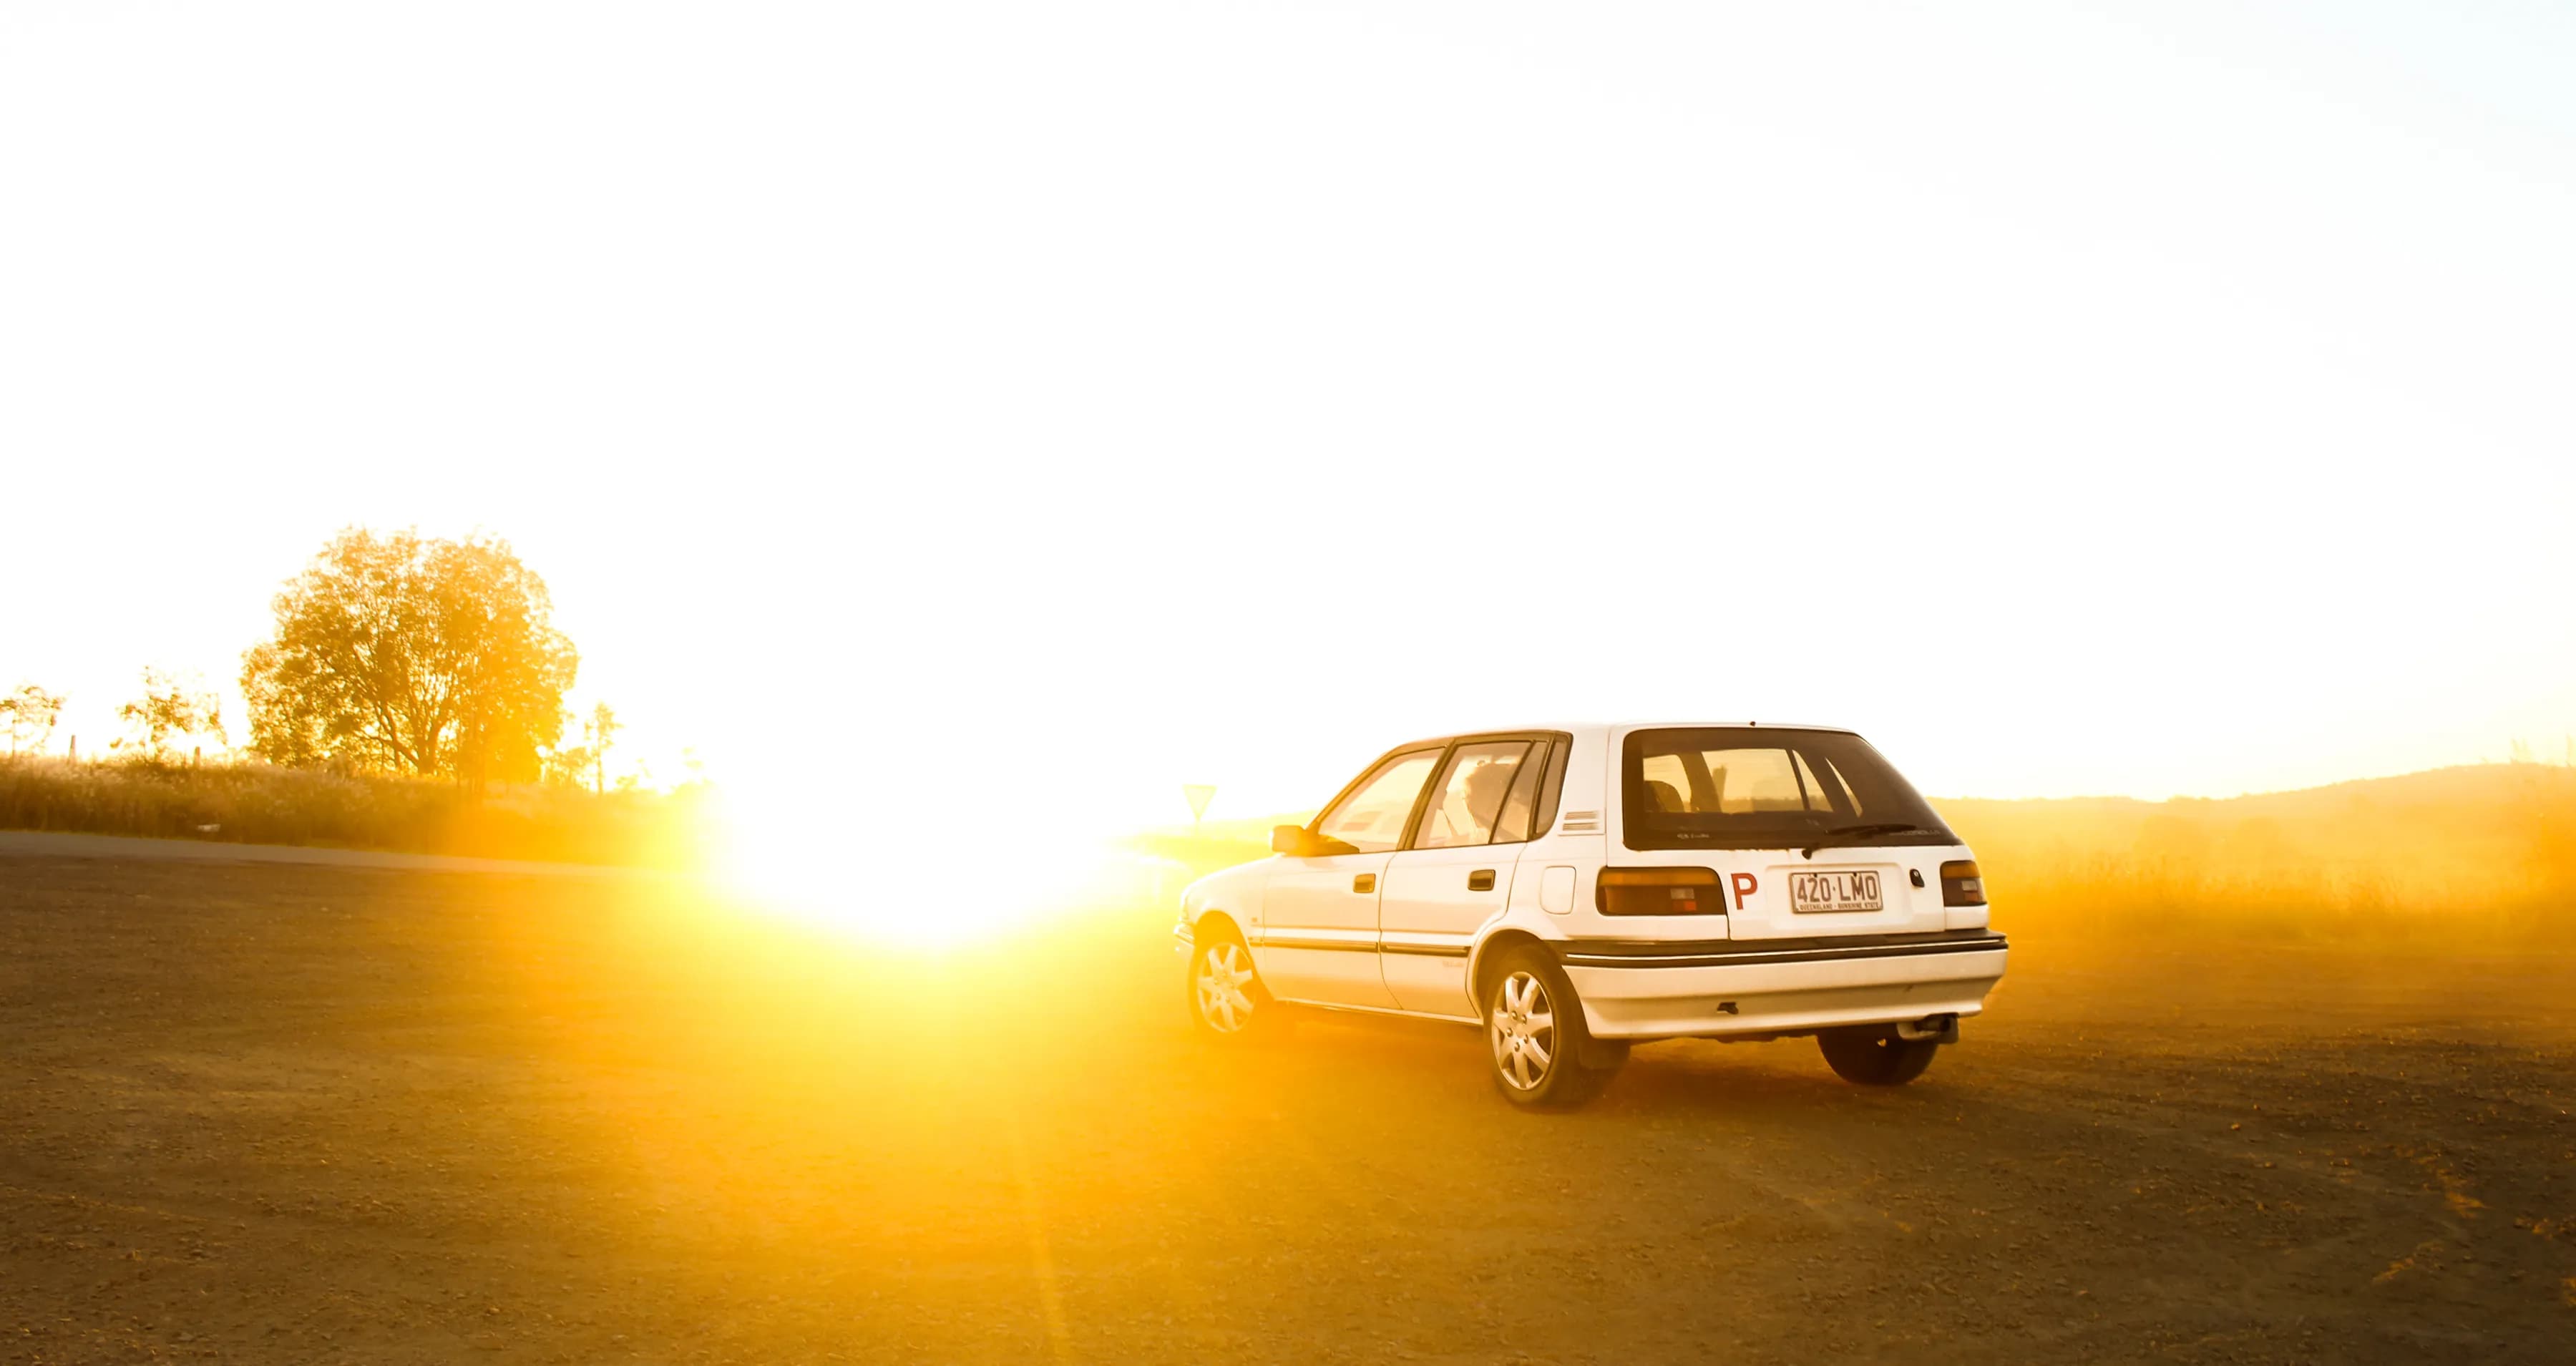 2015-05-10-car-in-the-sunset